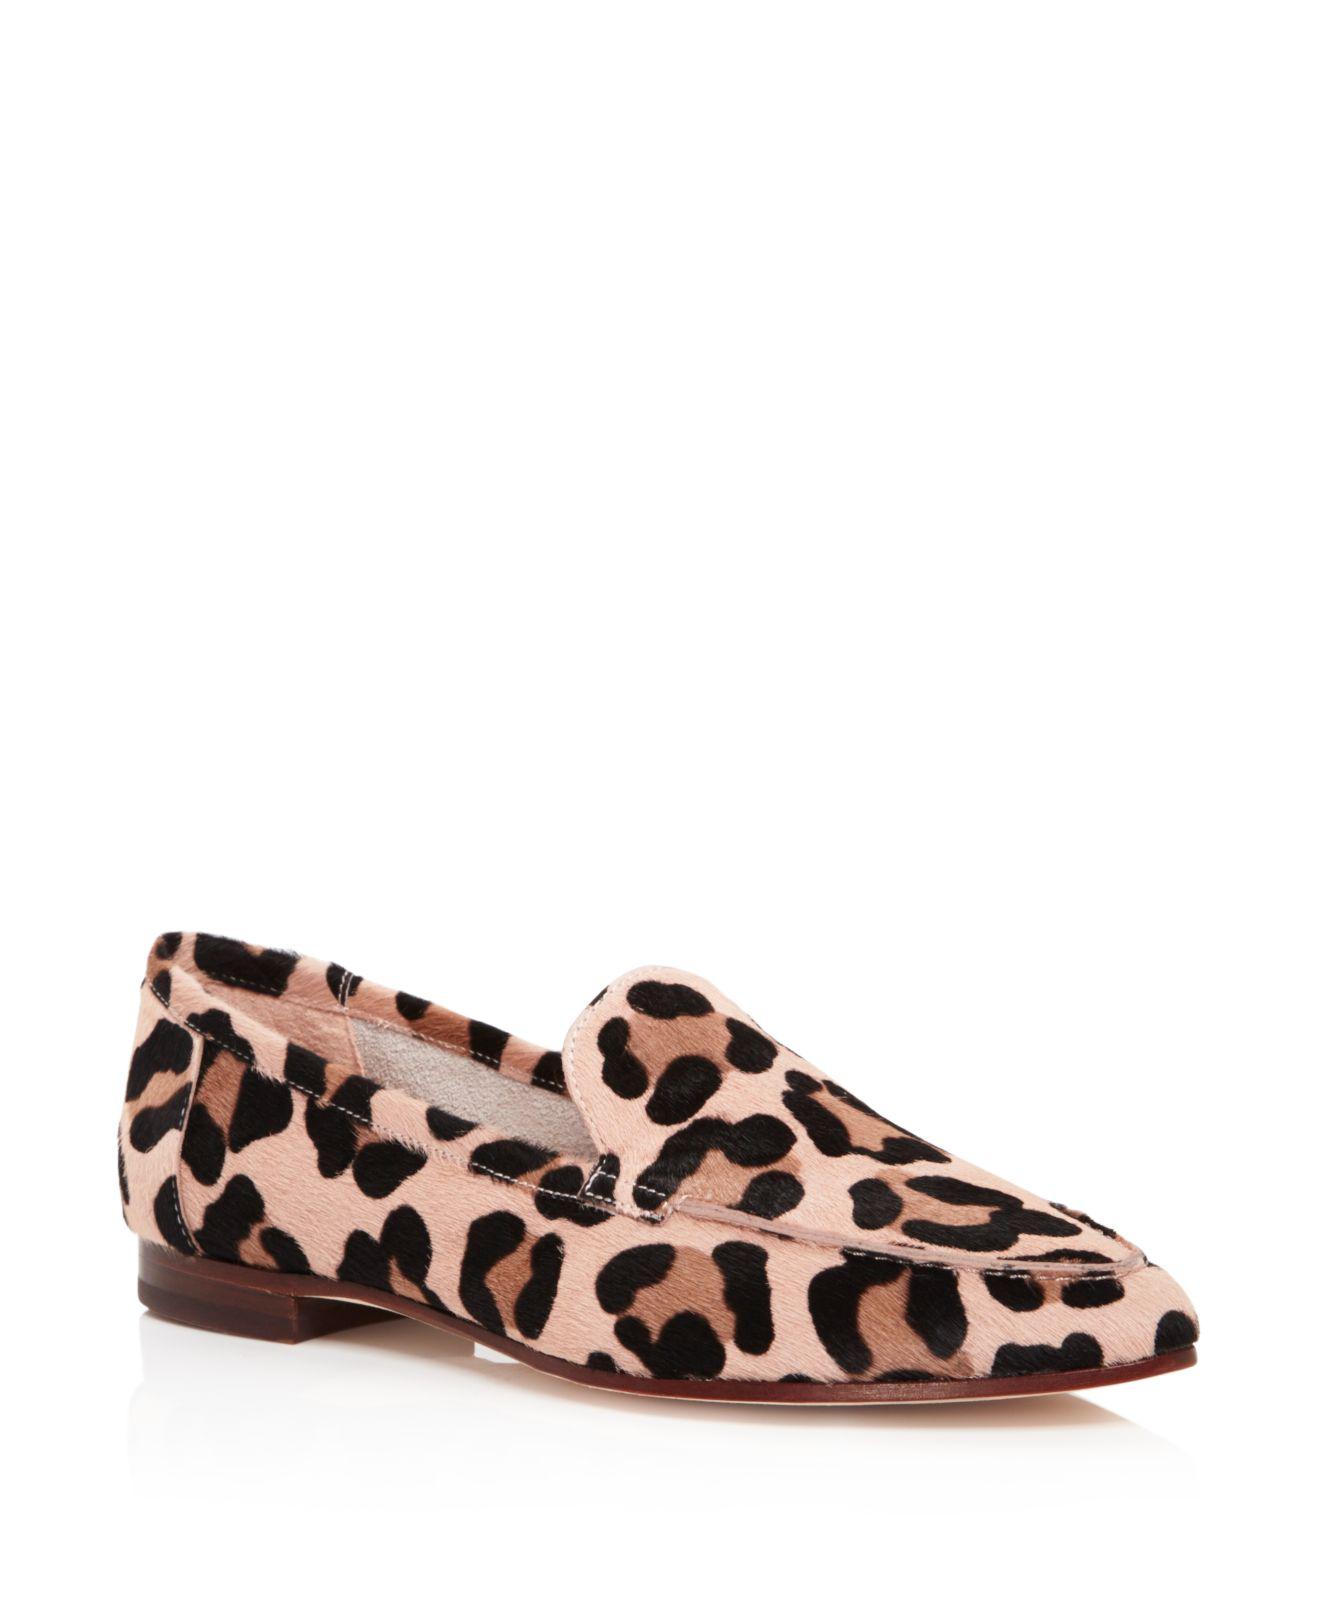 Kate Spade Carima Leopard Print Calf Hair Loafers in Brown | Lyst